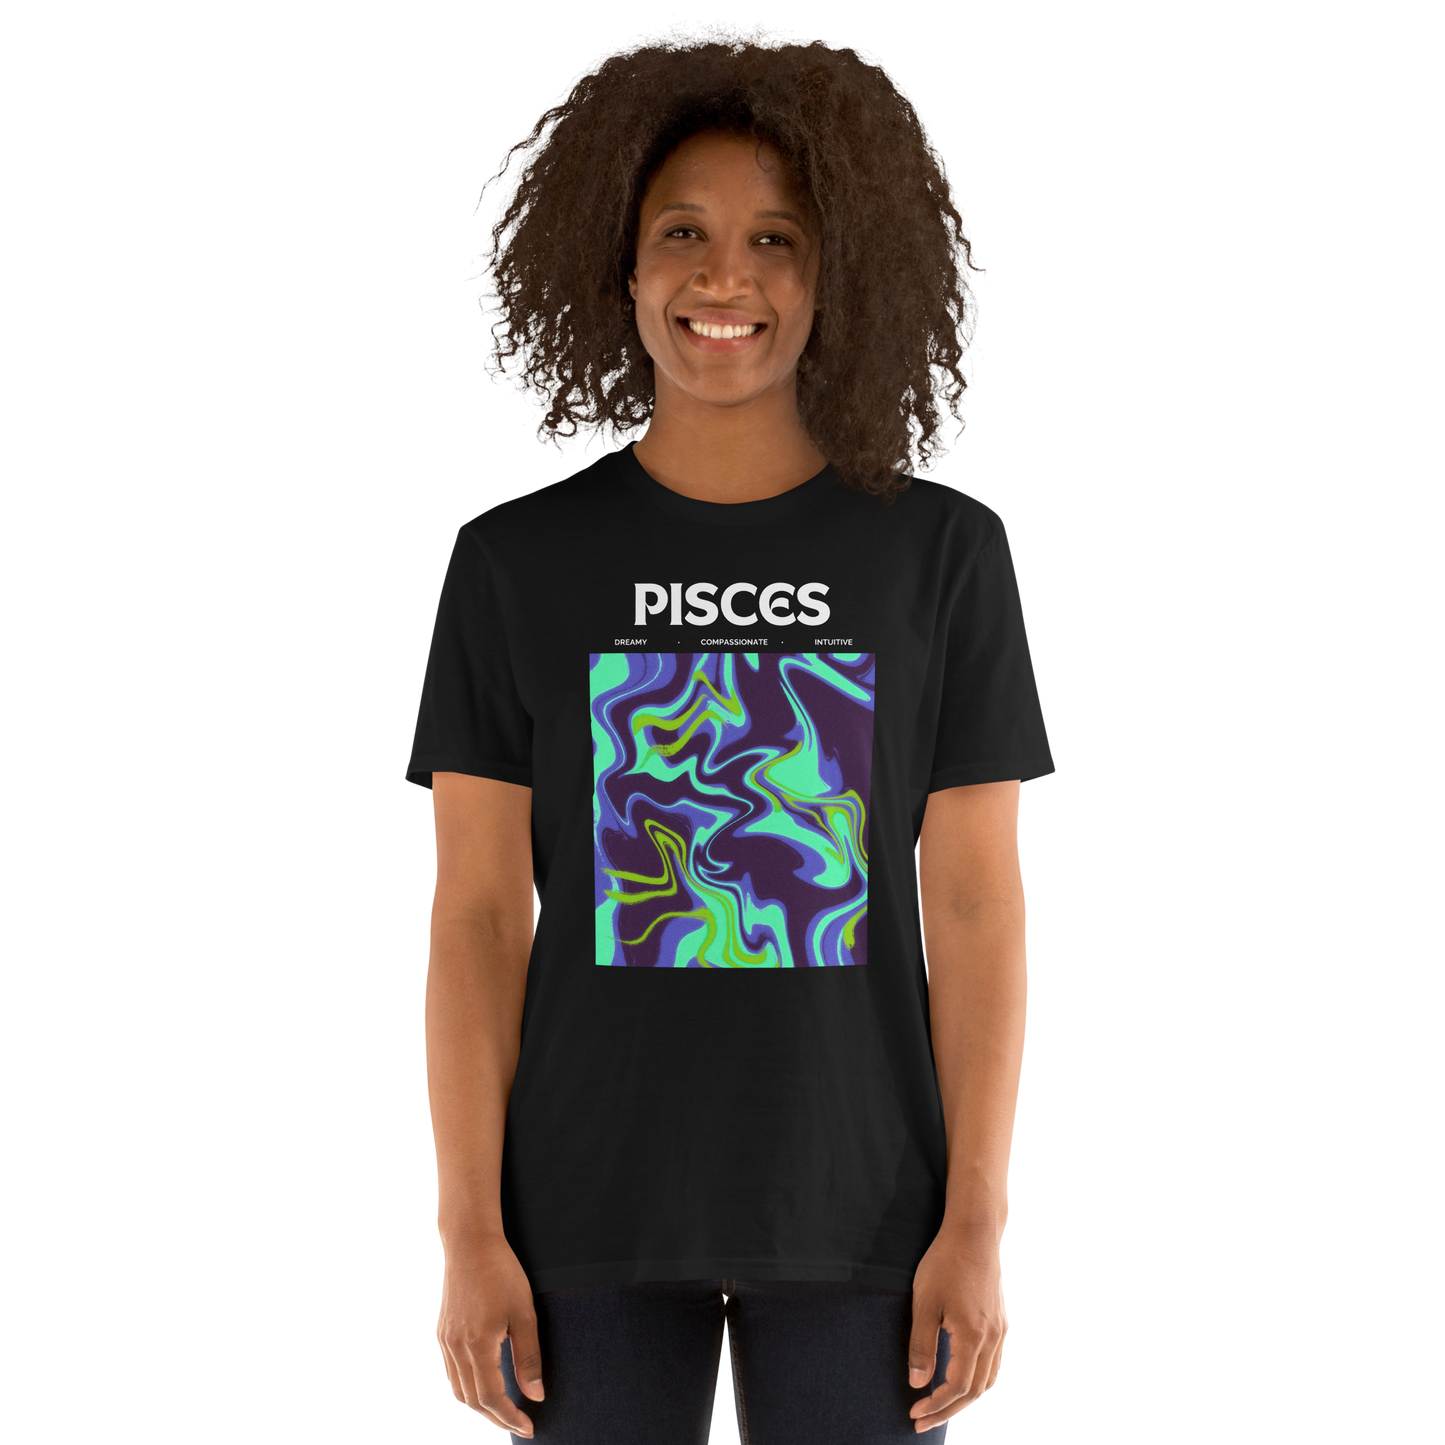 Smiling woman wearing a Black Pisces T-Shirt featuring an Abstract Pisces Star Sign graphic on the chest - Cool Graphic Zodiac T-Shirts - Boozy Fox